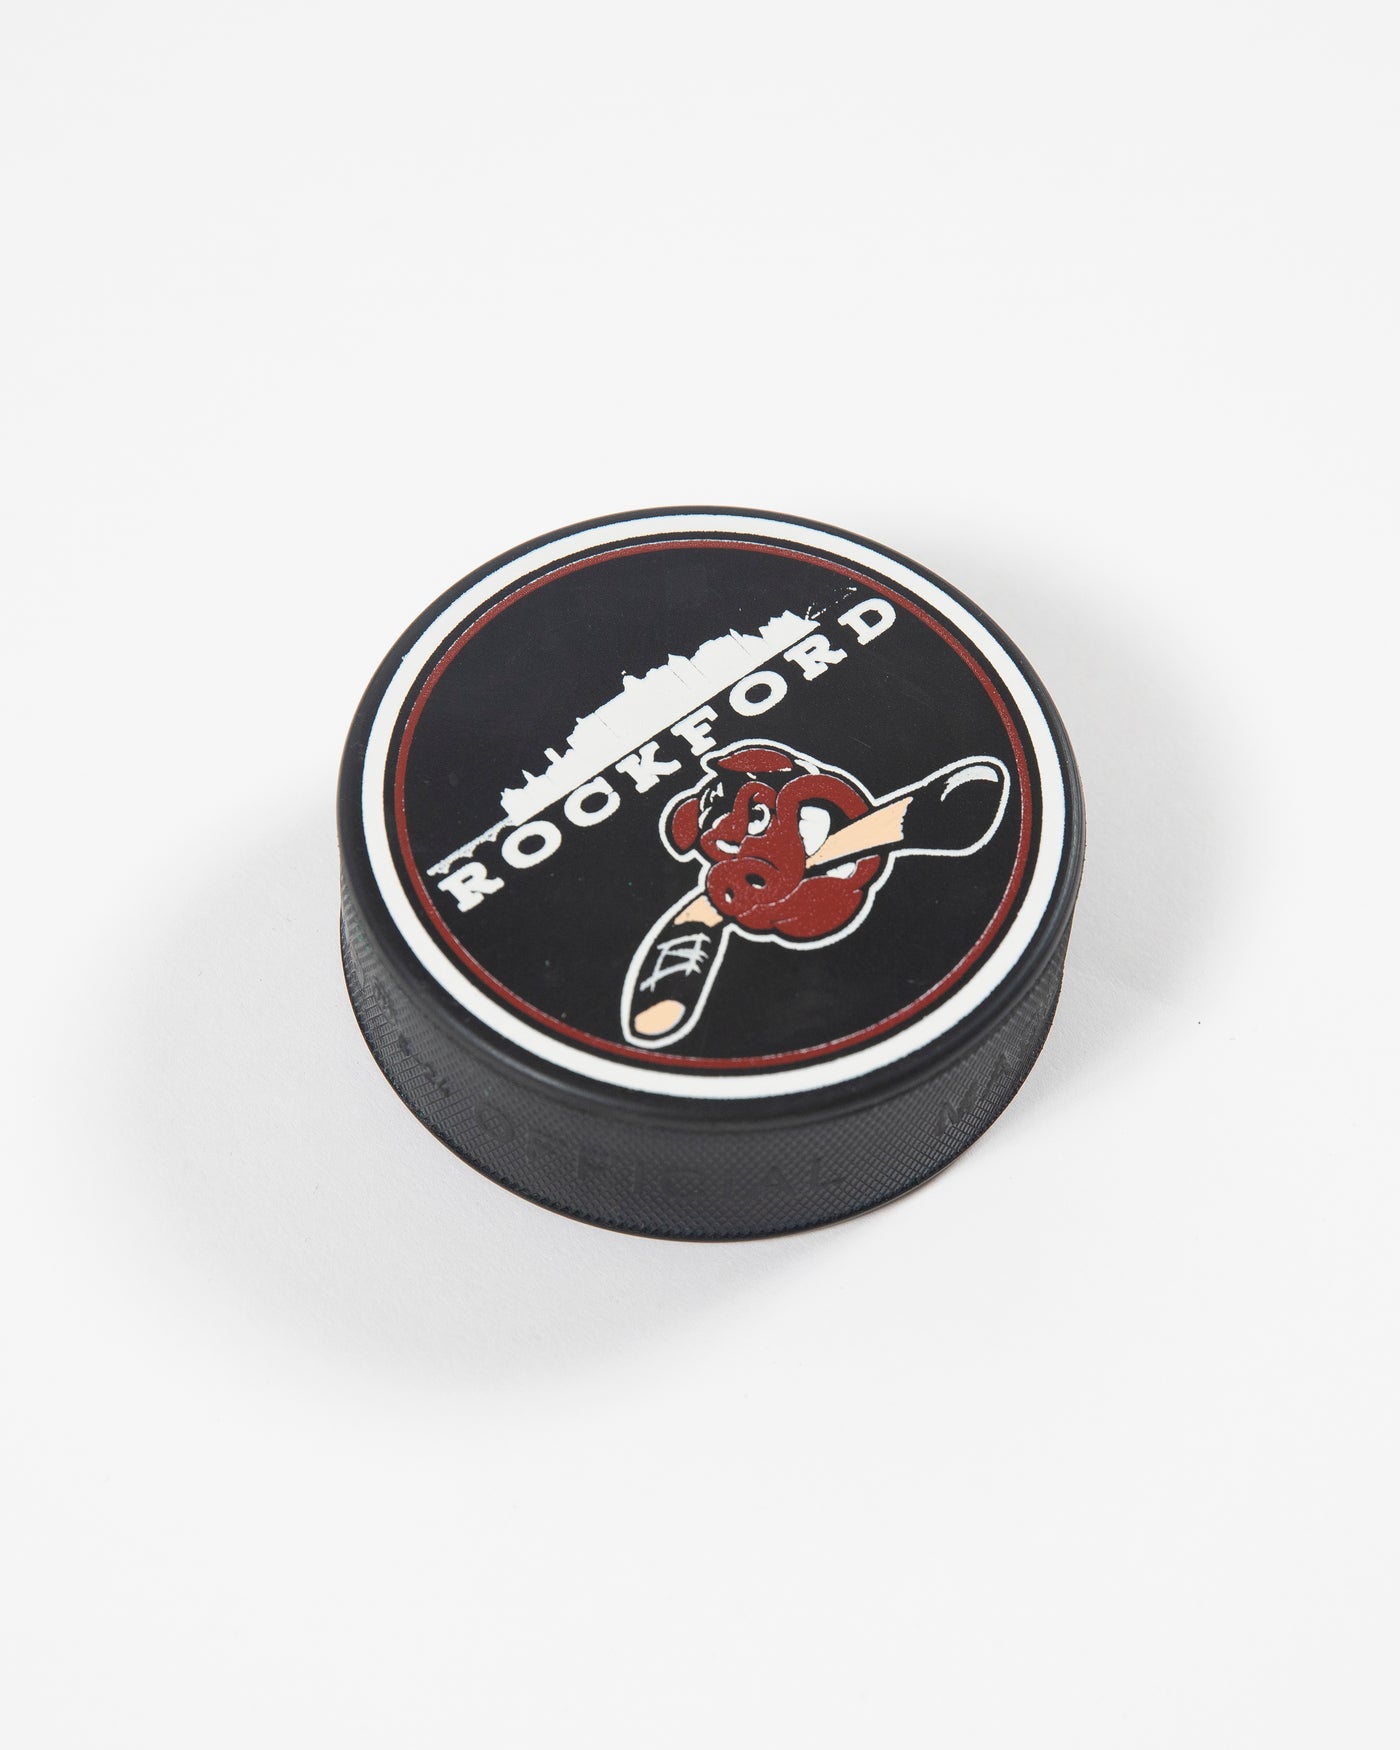 Black Rockford IceHogs hockey puck with skyline graphic - angled lay flat